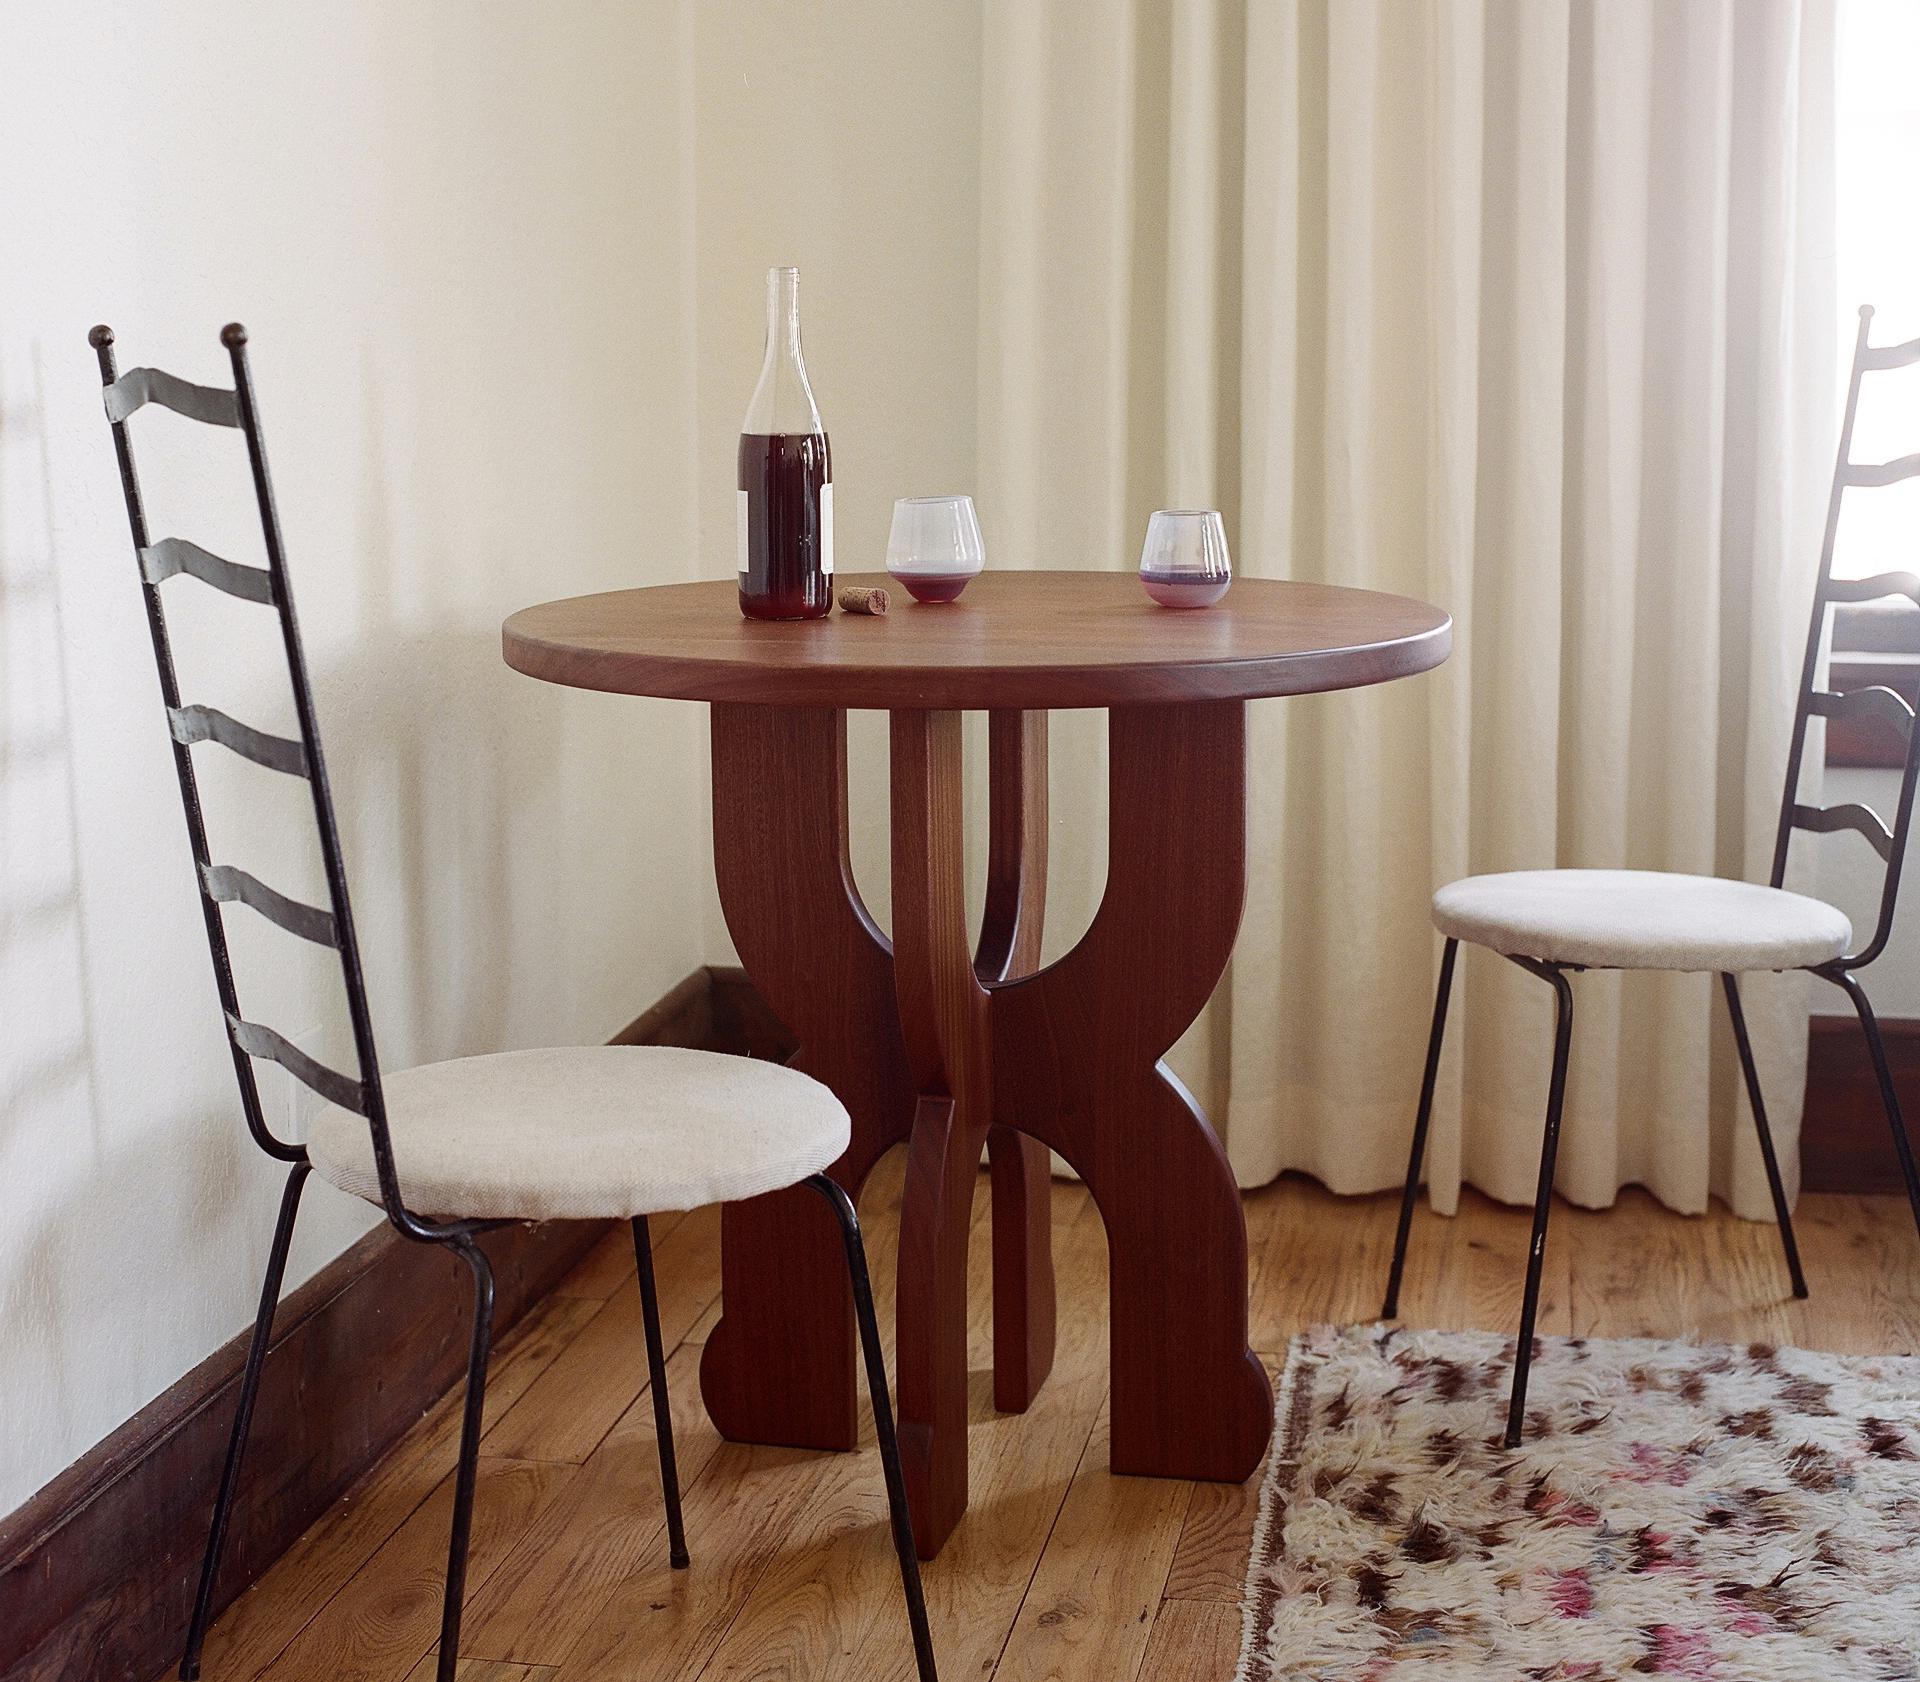 The Table Wine Table features soft curves and a playful silhouette. Petite yet versatile, it can be used as an entry table, an oversized sofa side table, or a small table for a breakfast nook. Made by the women-owned Muhly studio in Austin, Texas,